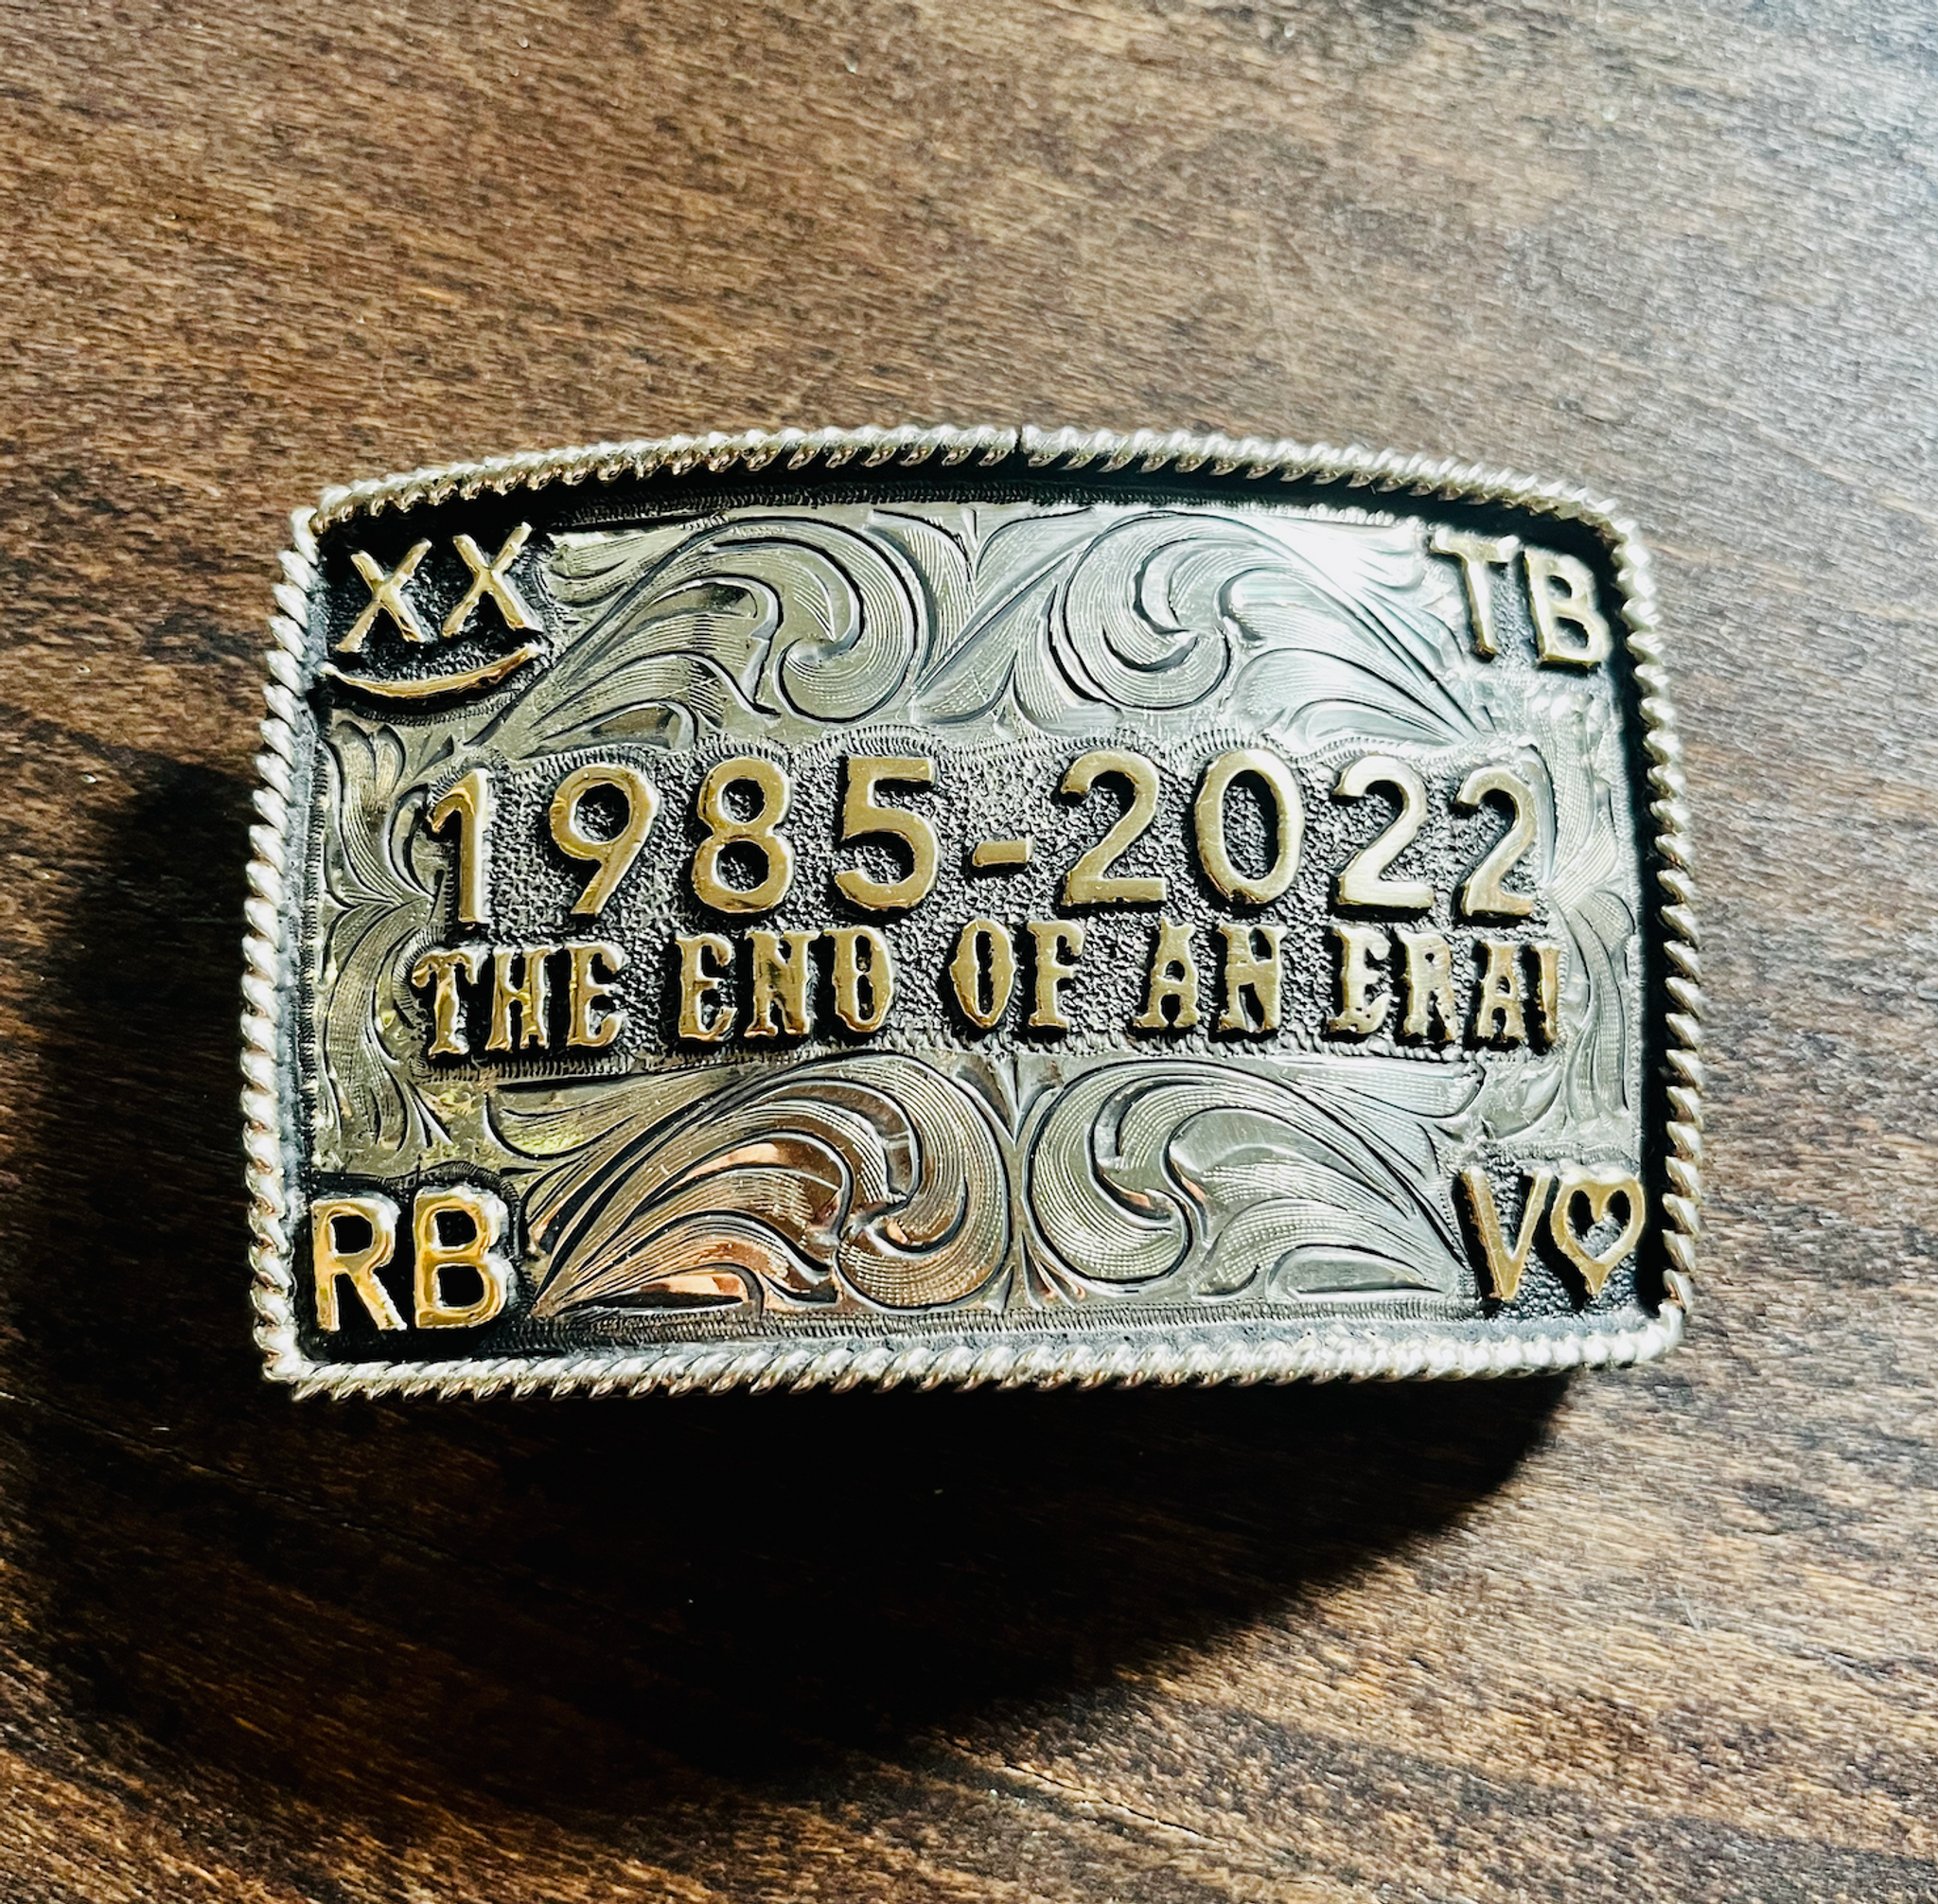 The History Behind Today's Custom Belt Buckles - A Cut Above Buckles